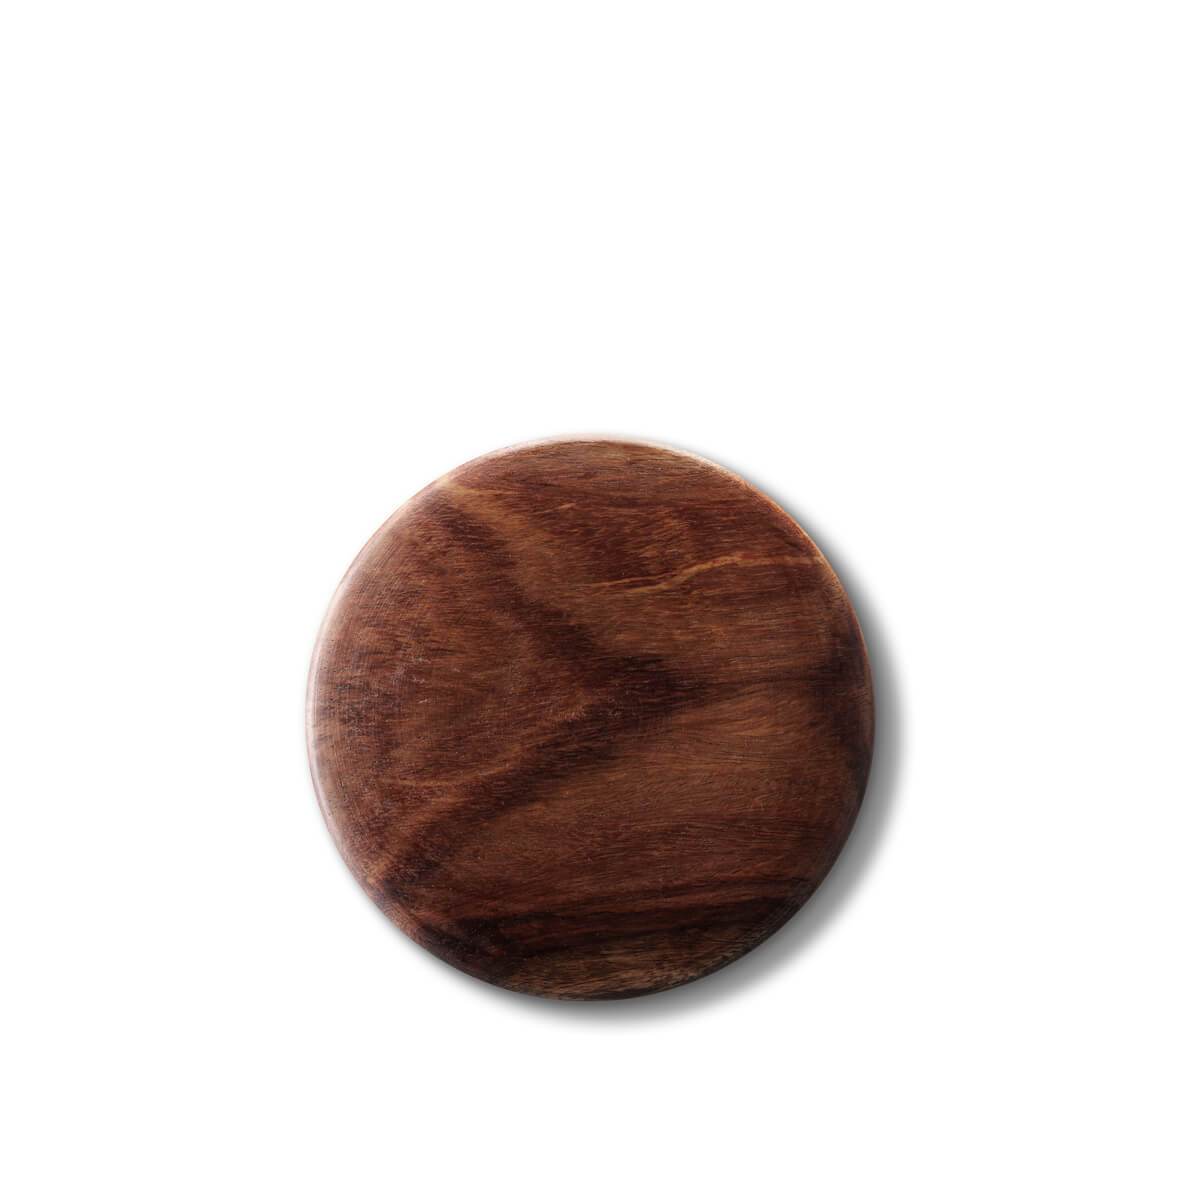 Round wooden lid for the Elite shaving soap and bowl.